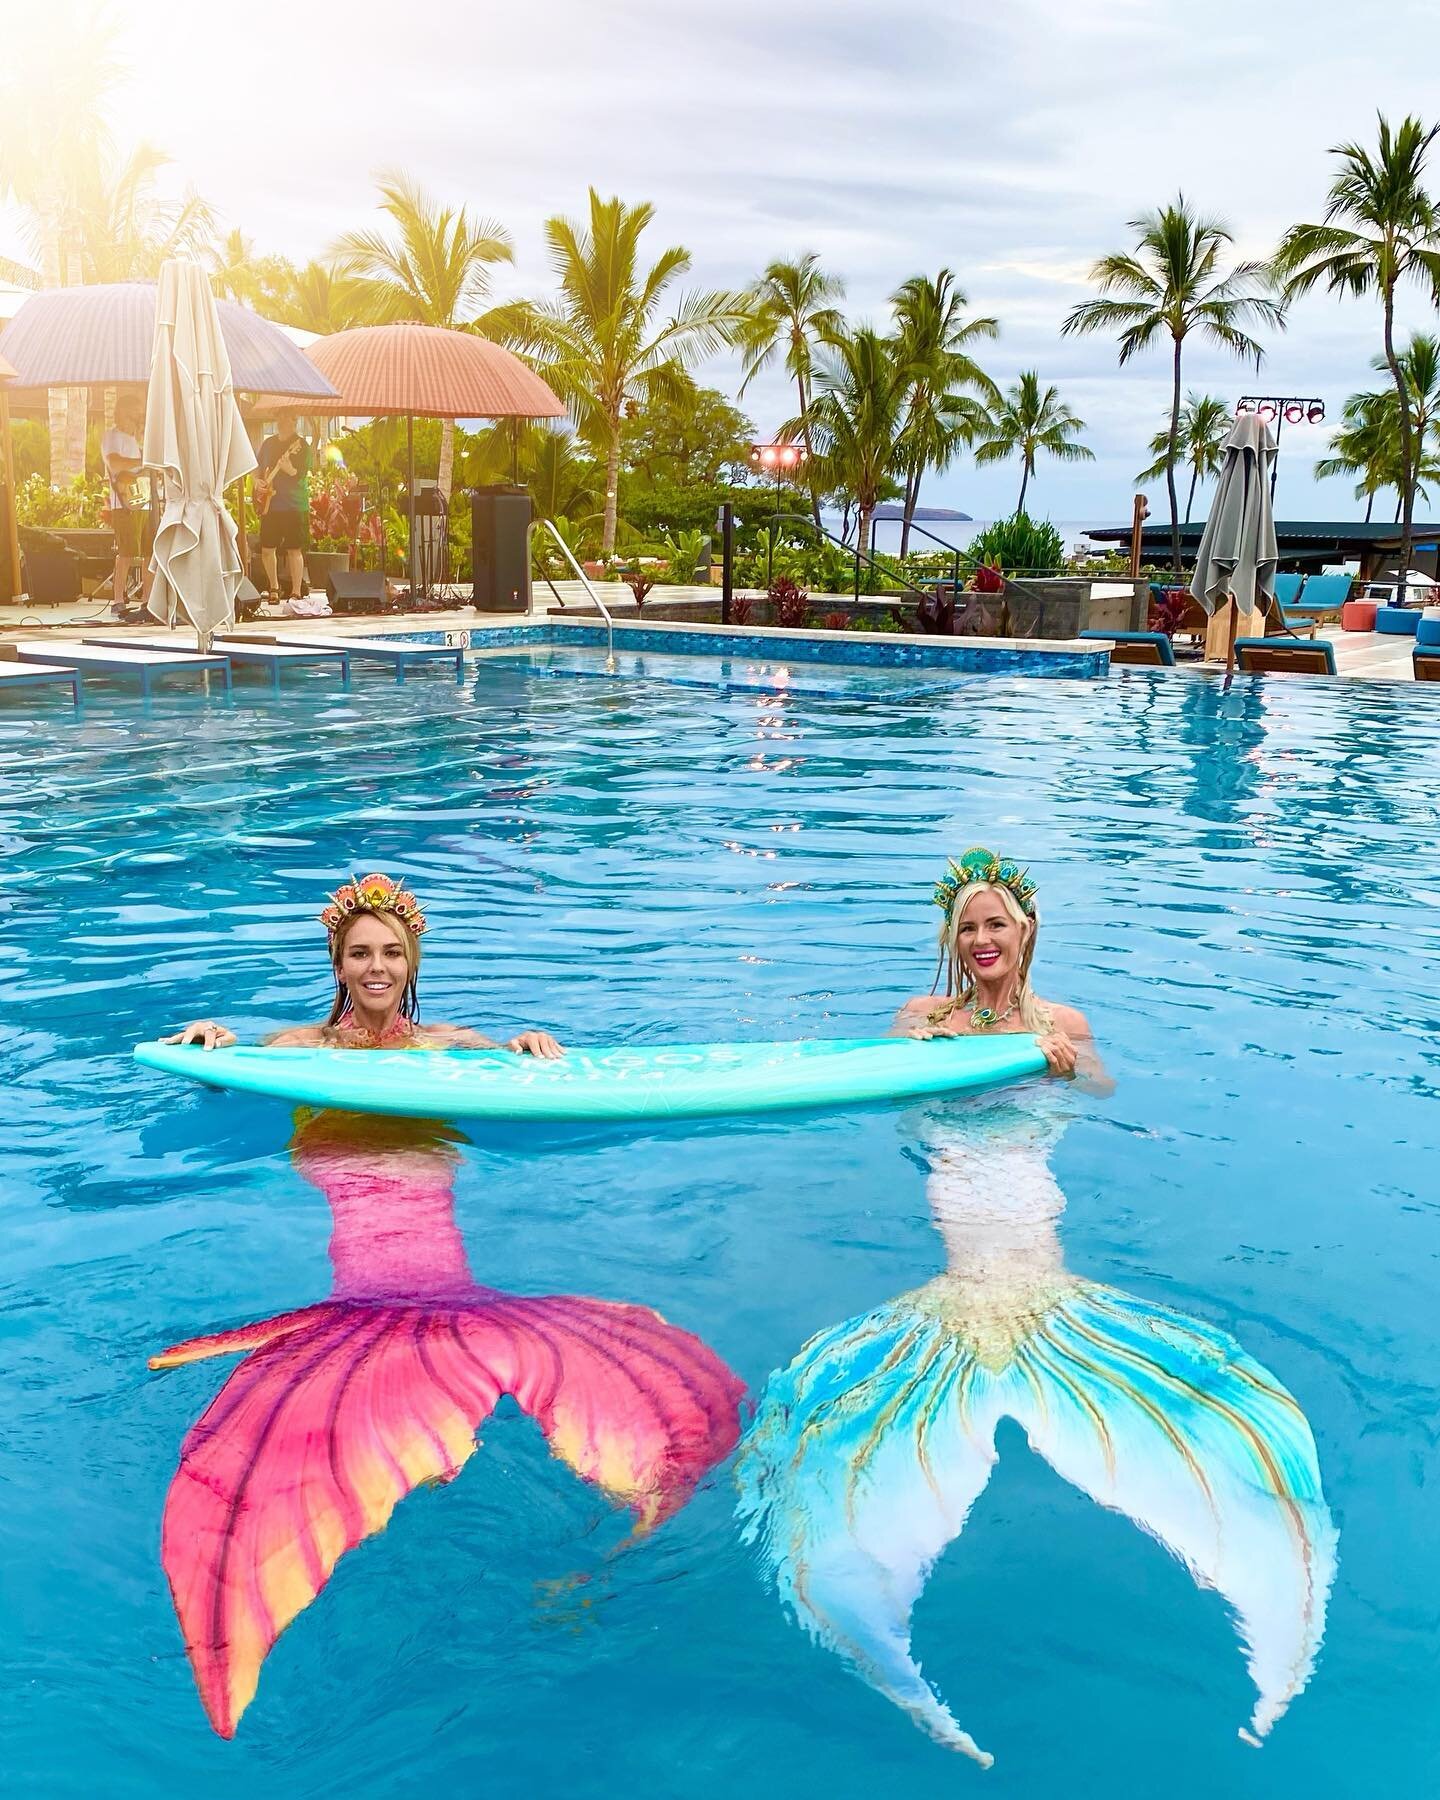 ✨Our mermaids had such a blast at the big pool party in Wailea this weekend! Thank you @cirquelicious for making such an amazing night possible. We love bringing our mermaid magic to private events!! @mermaidaqualina @mermaidreya

#maui #mauihawaii #